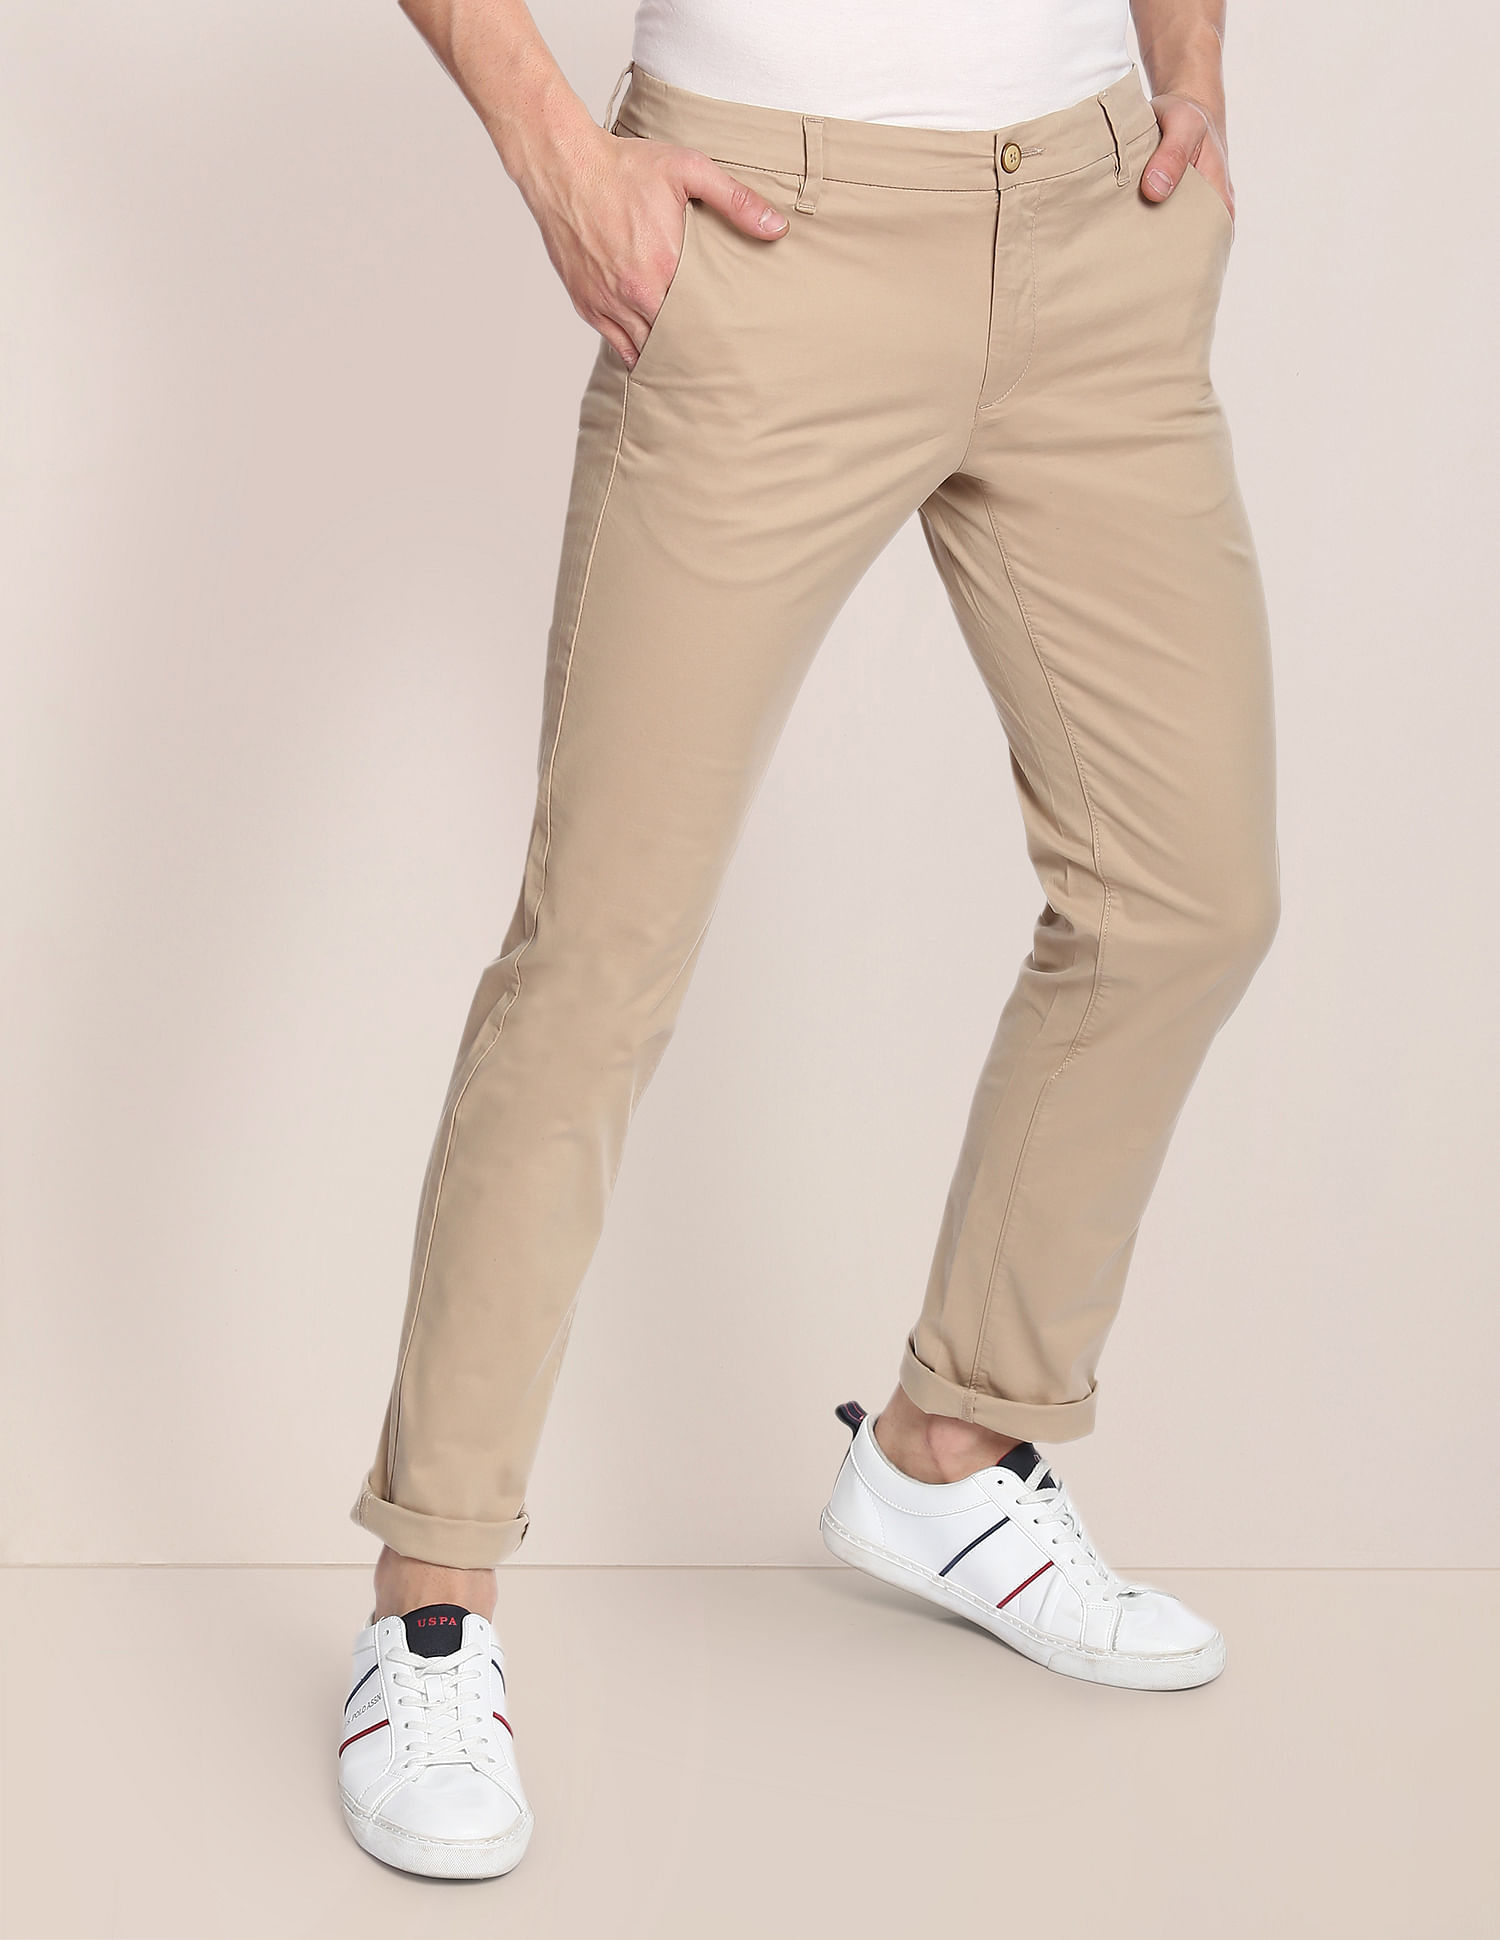 US POLO ASSN Men Blue Flat Front Solid Casual Trousers Buy US POLO  ASSN Men Blue Flat Front Solid Casual Trousers Online at Best Price in  India  NykaaMan